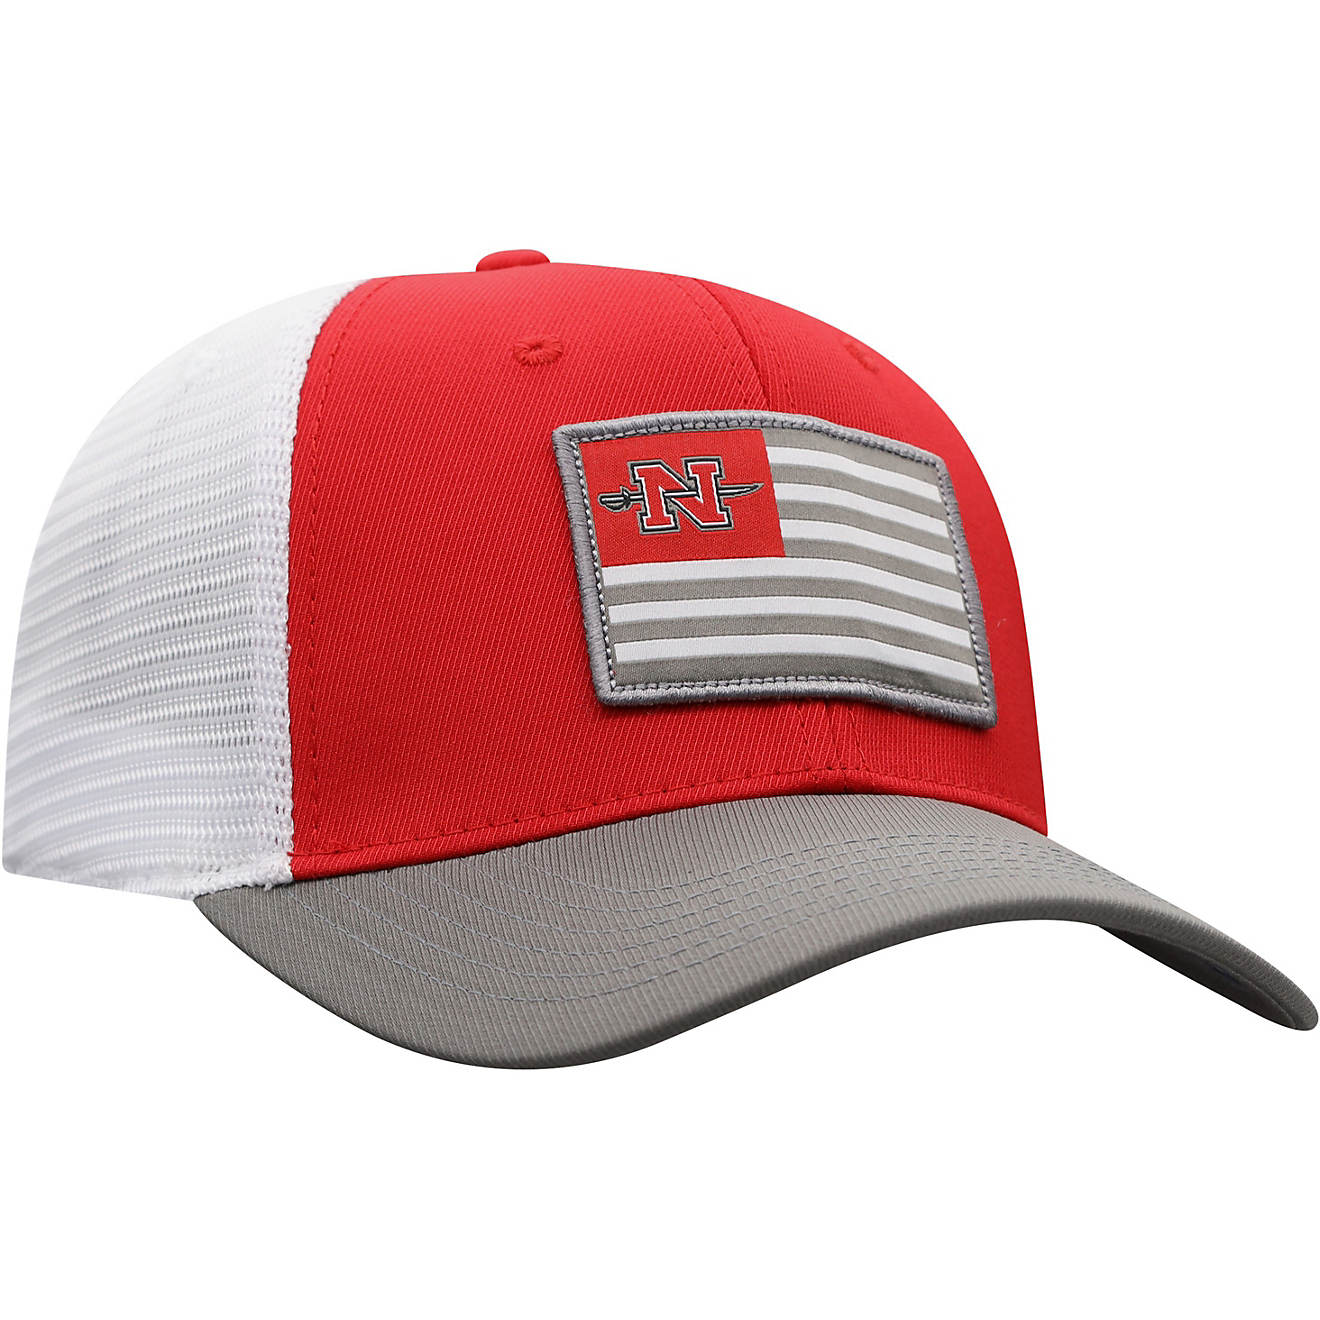 Top of the World Men's Nicholls State University Pedigree One Fit Cap                                                            - view number 1